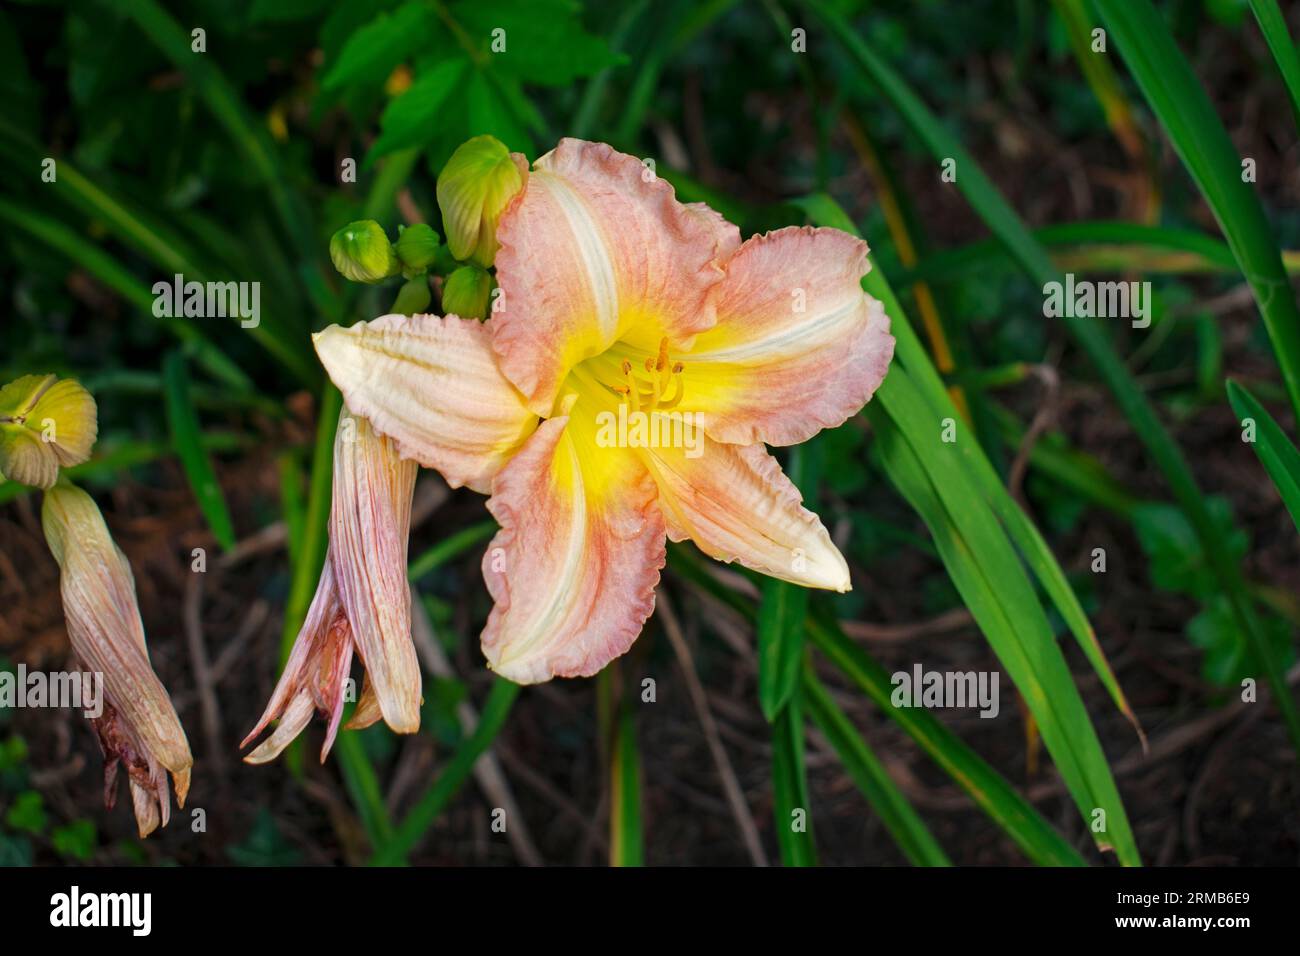 Light pink ditch lily, a type of day lily, on a blurred background of green leaves abd branches -04 Stock Photo